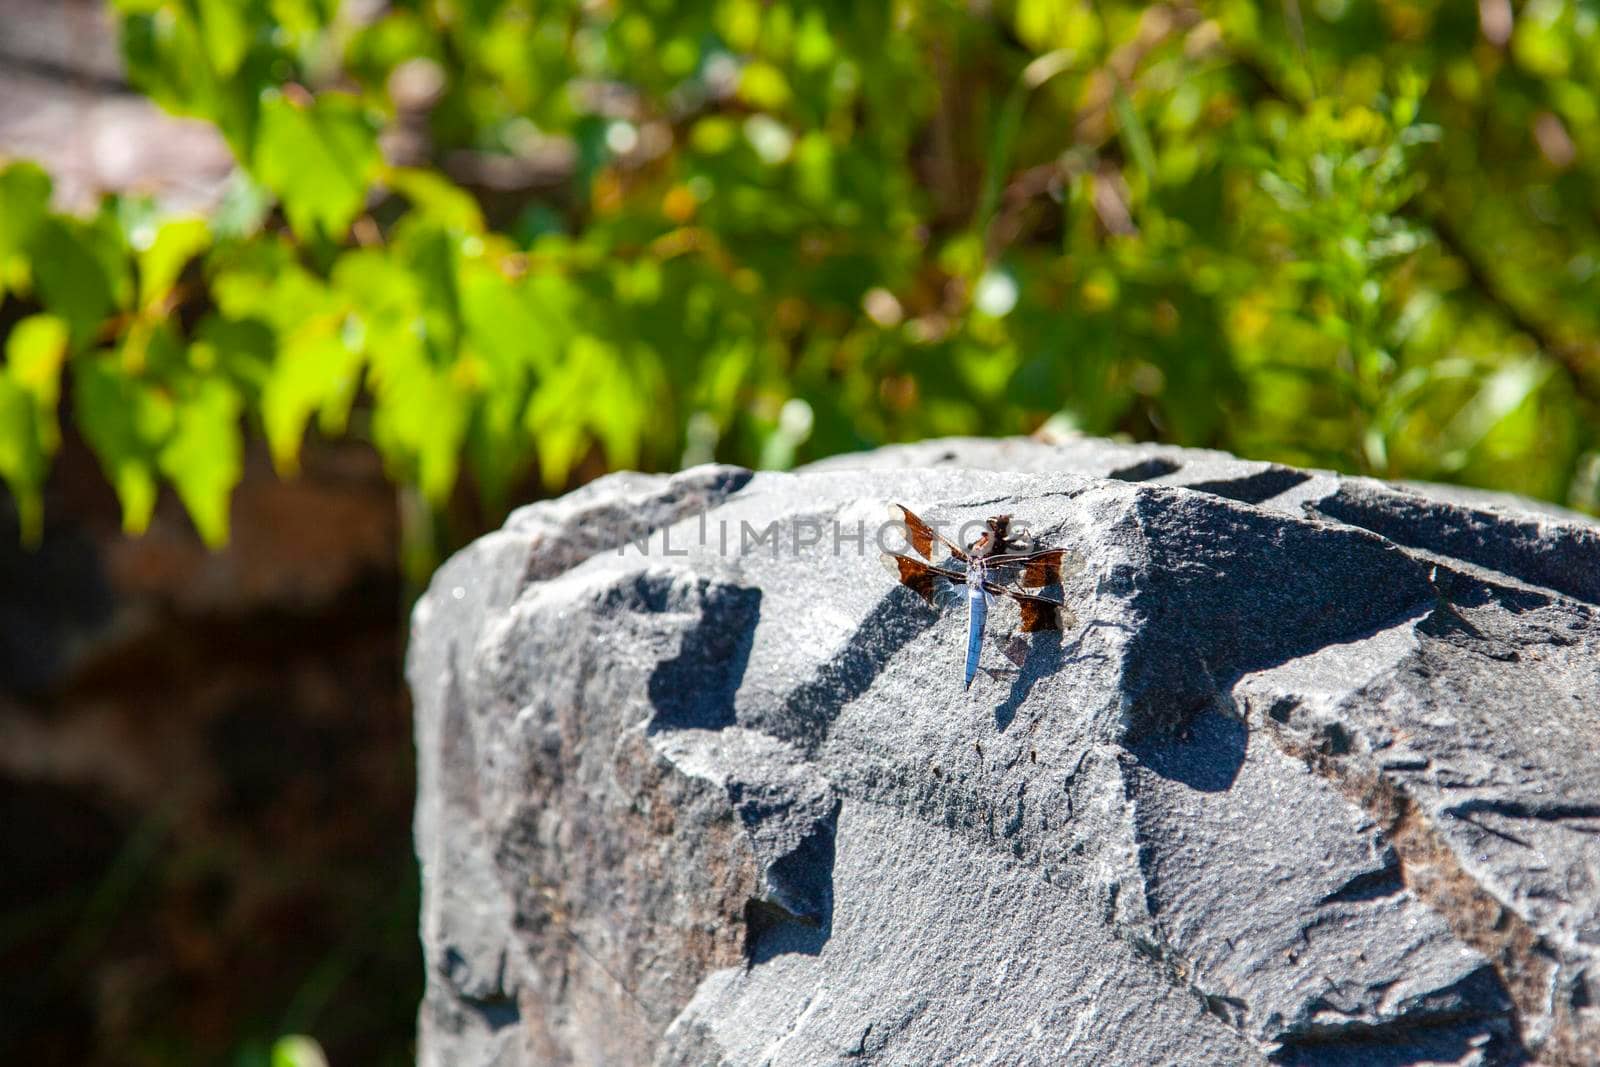 brown and blue dragon fly outside on a rock with copy space 